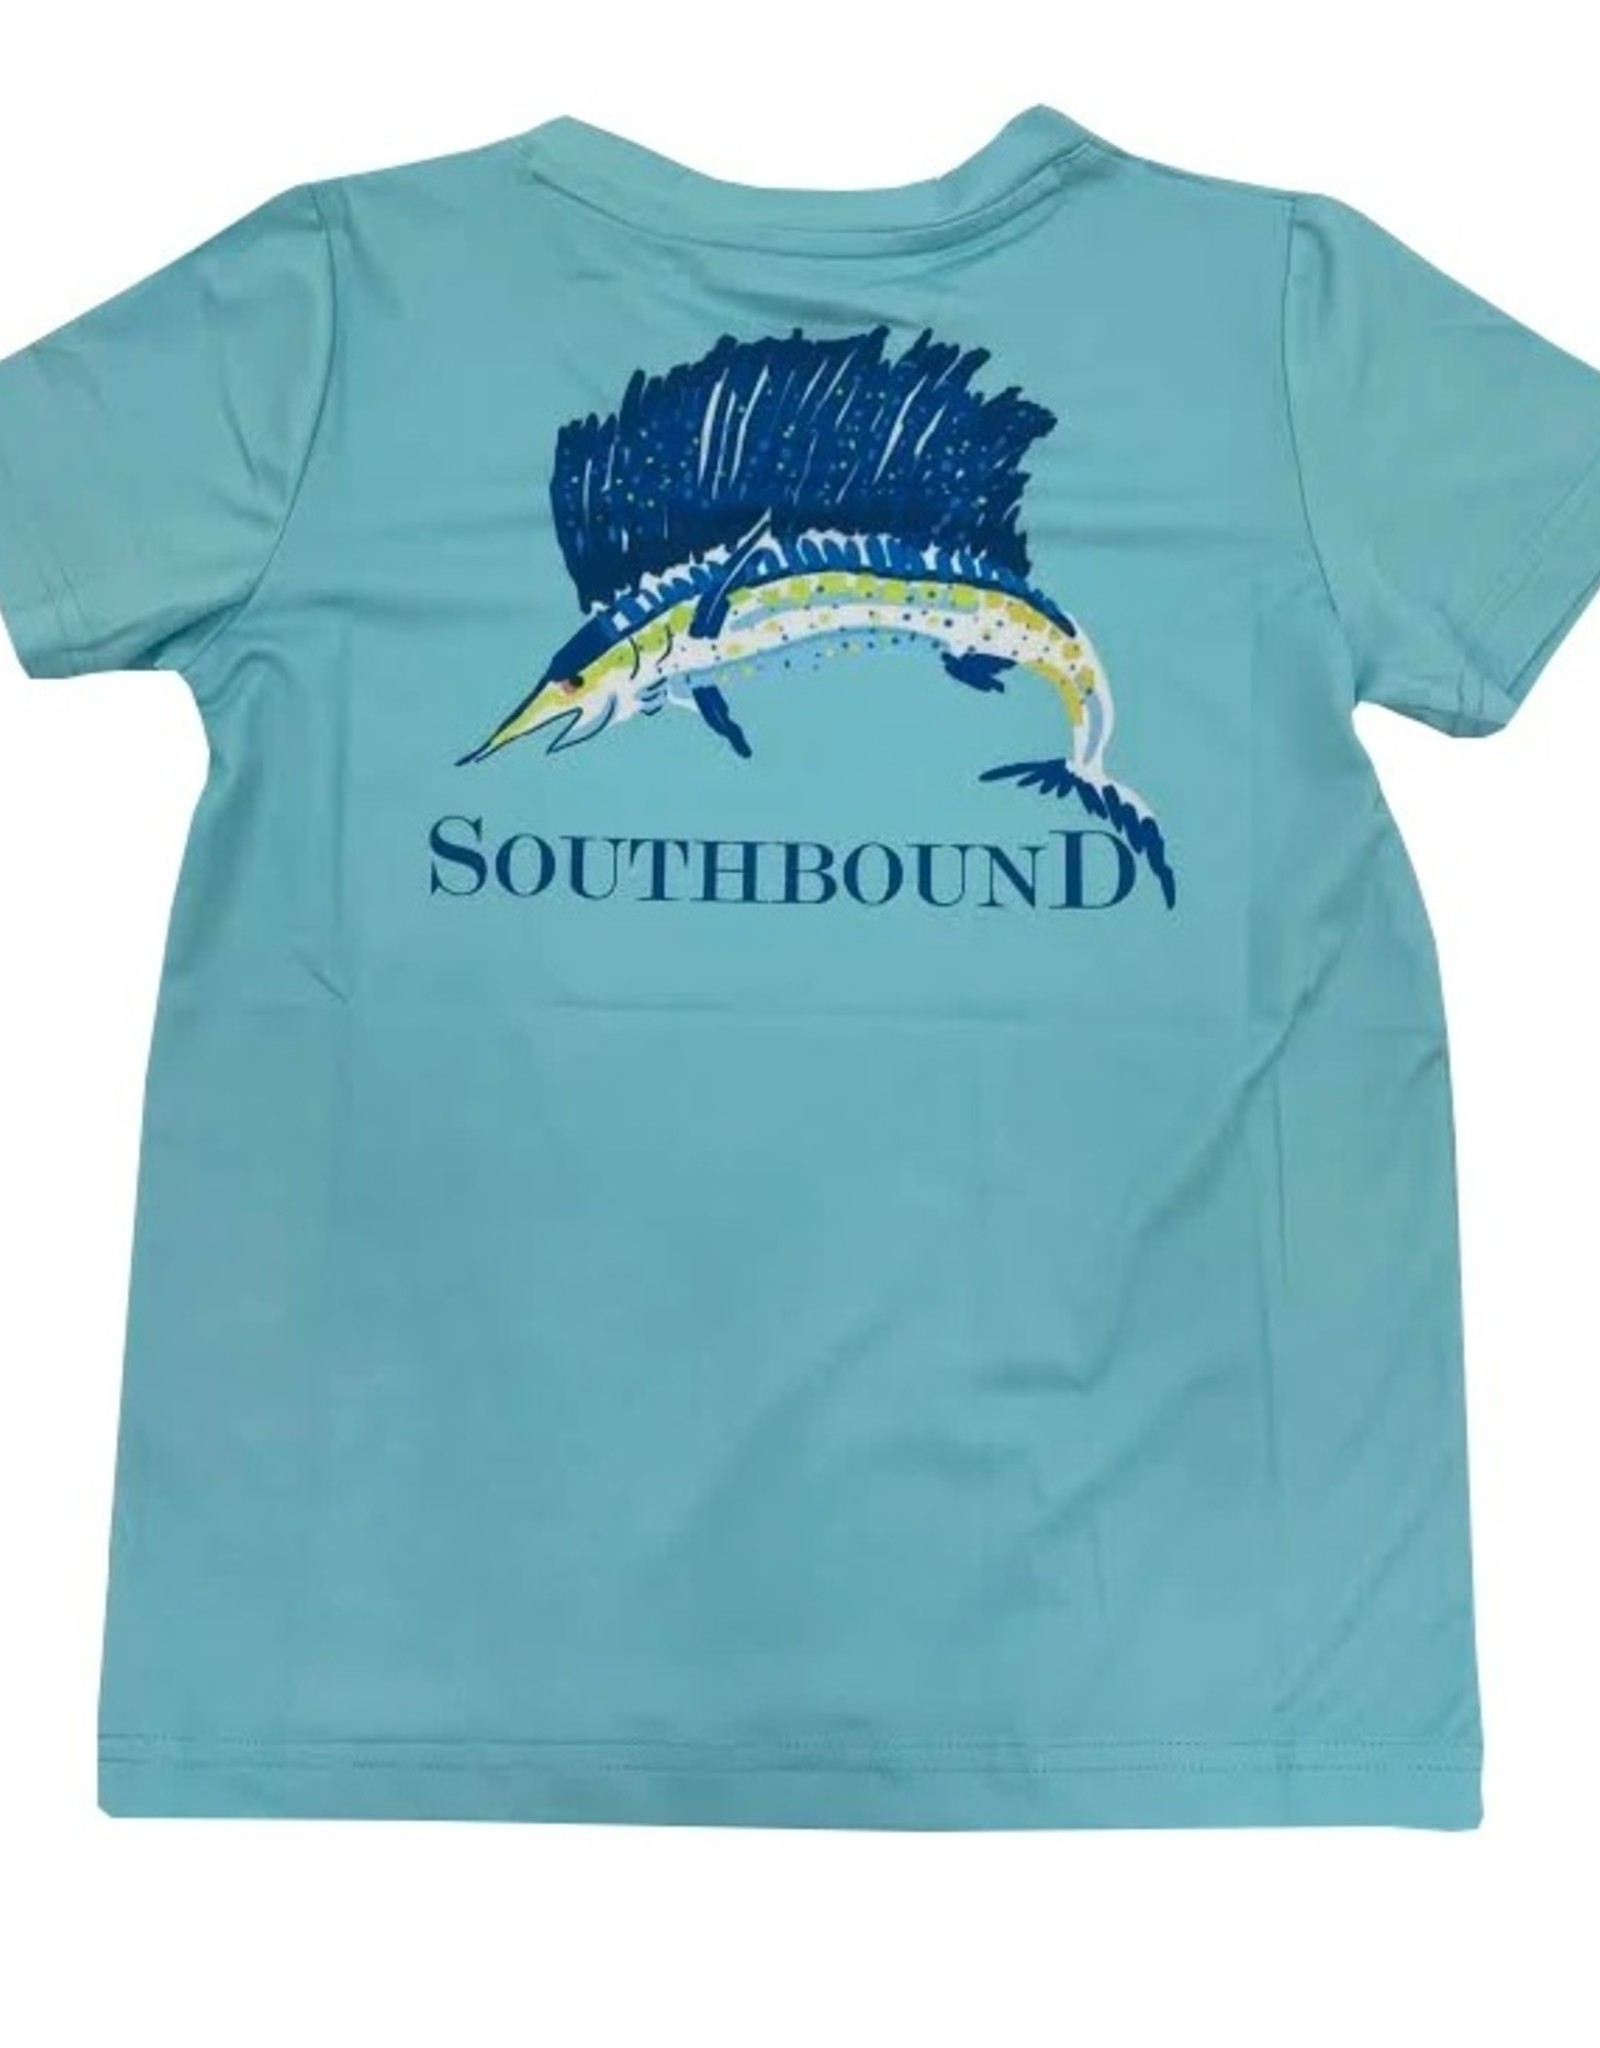 SouthBound Performance Tee